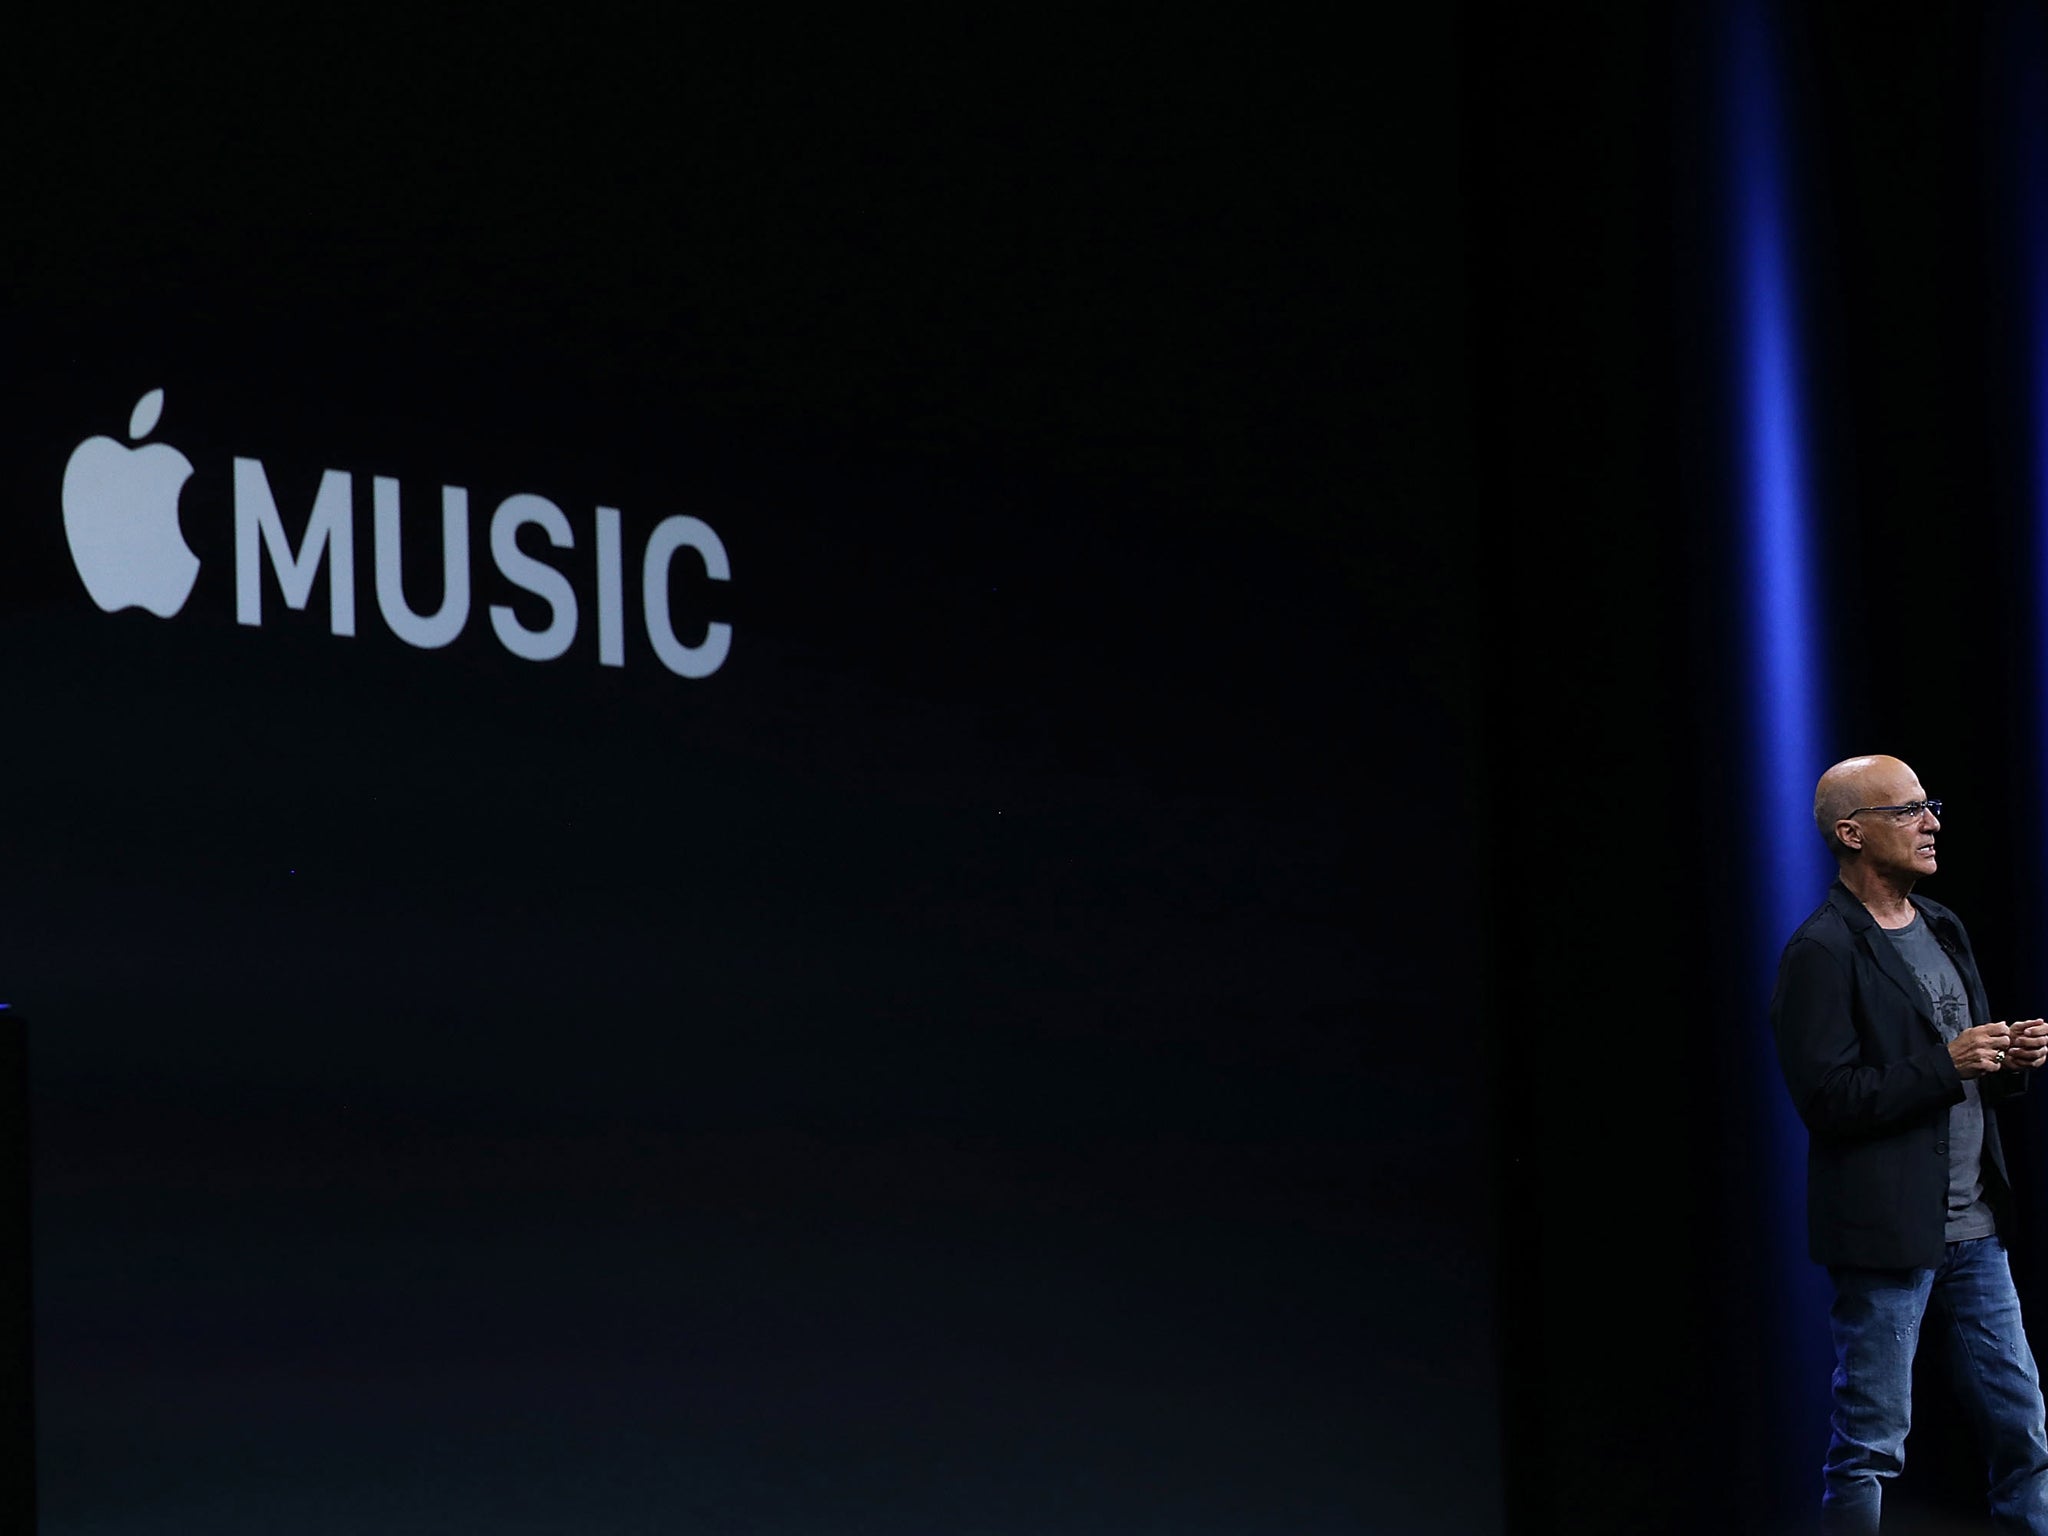 Johnny Iovine announces Apple Music during Apple WWDC on June 8, 2015 in San Francisco, California. Apple's annual developers conference runs through June 12